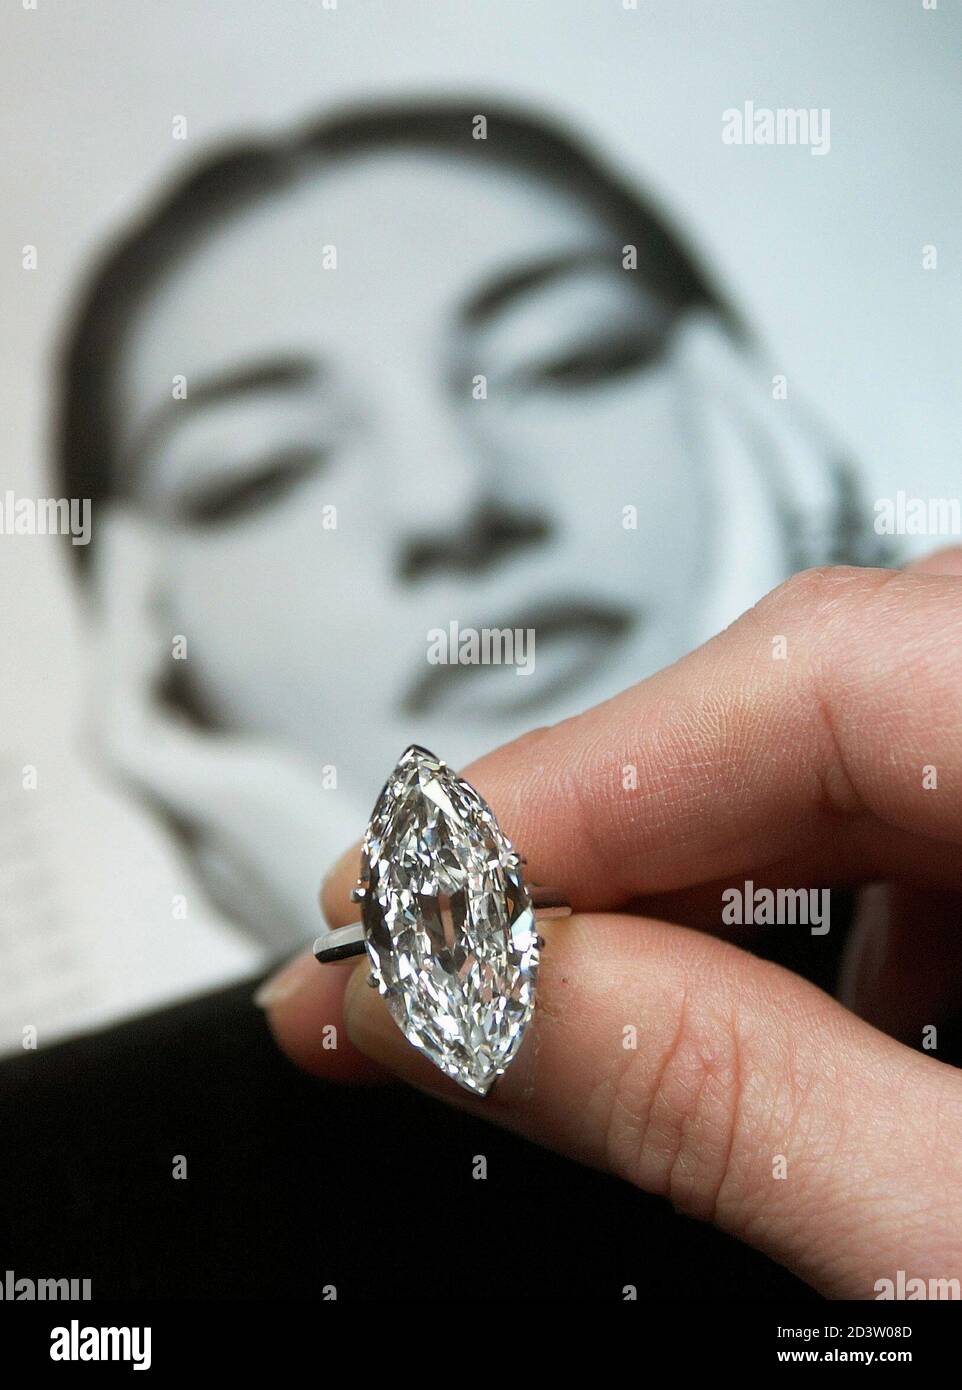 biggest diamonds in the world: Where are They Located?